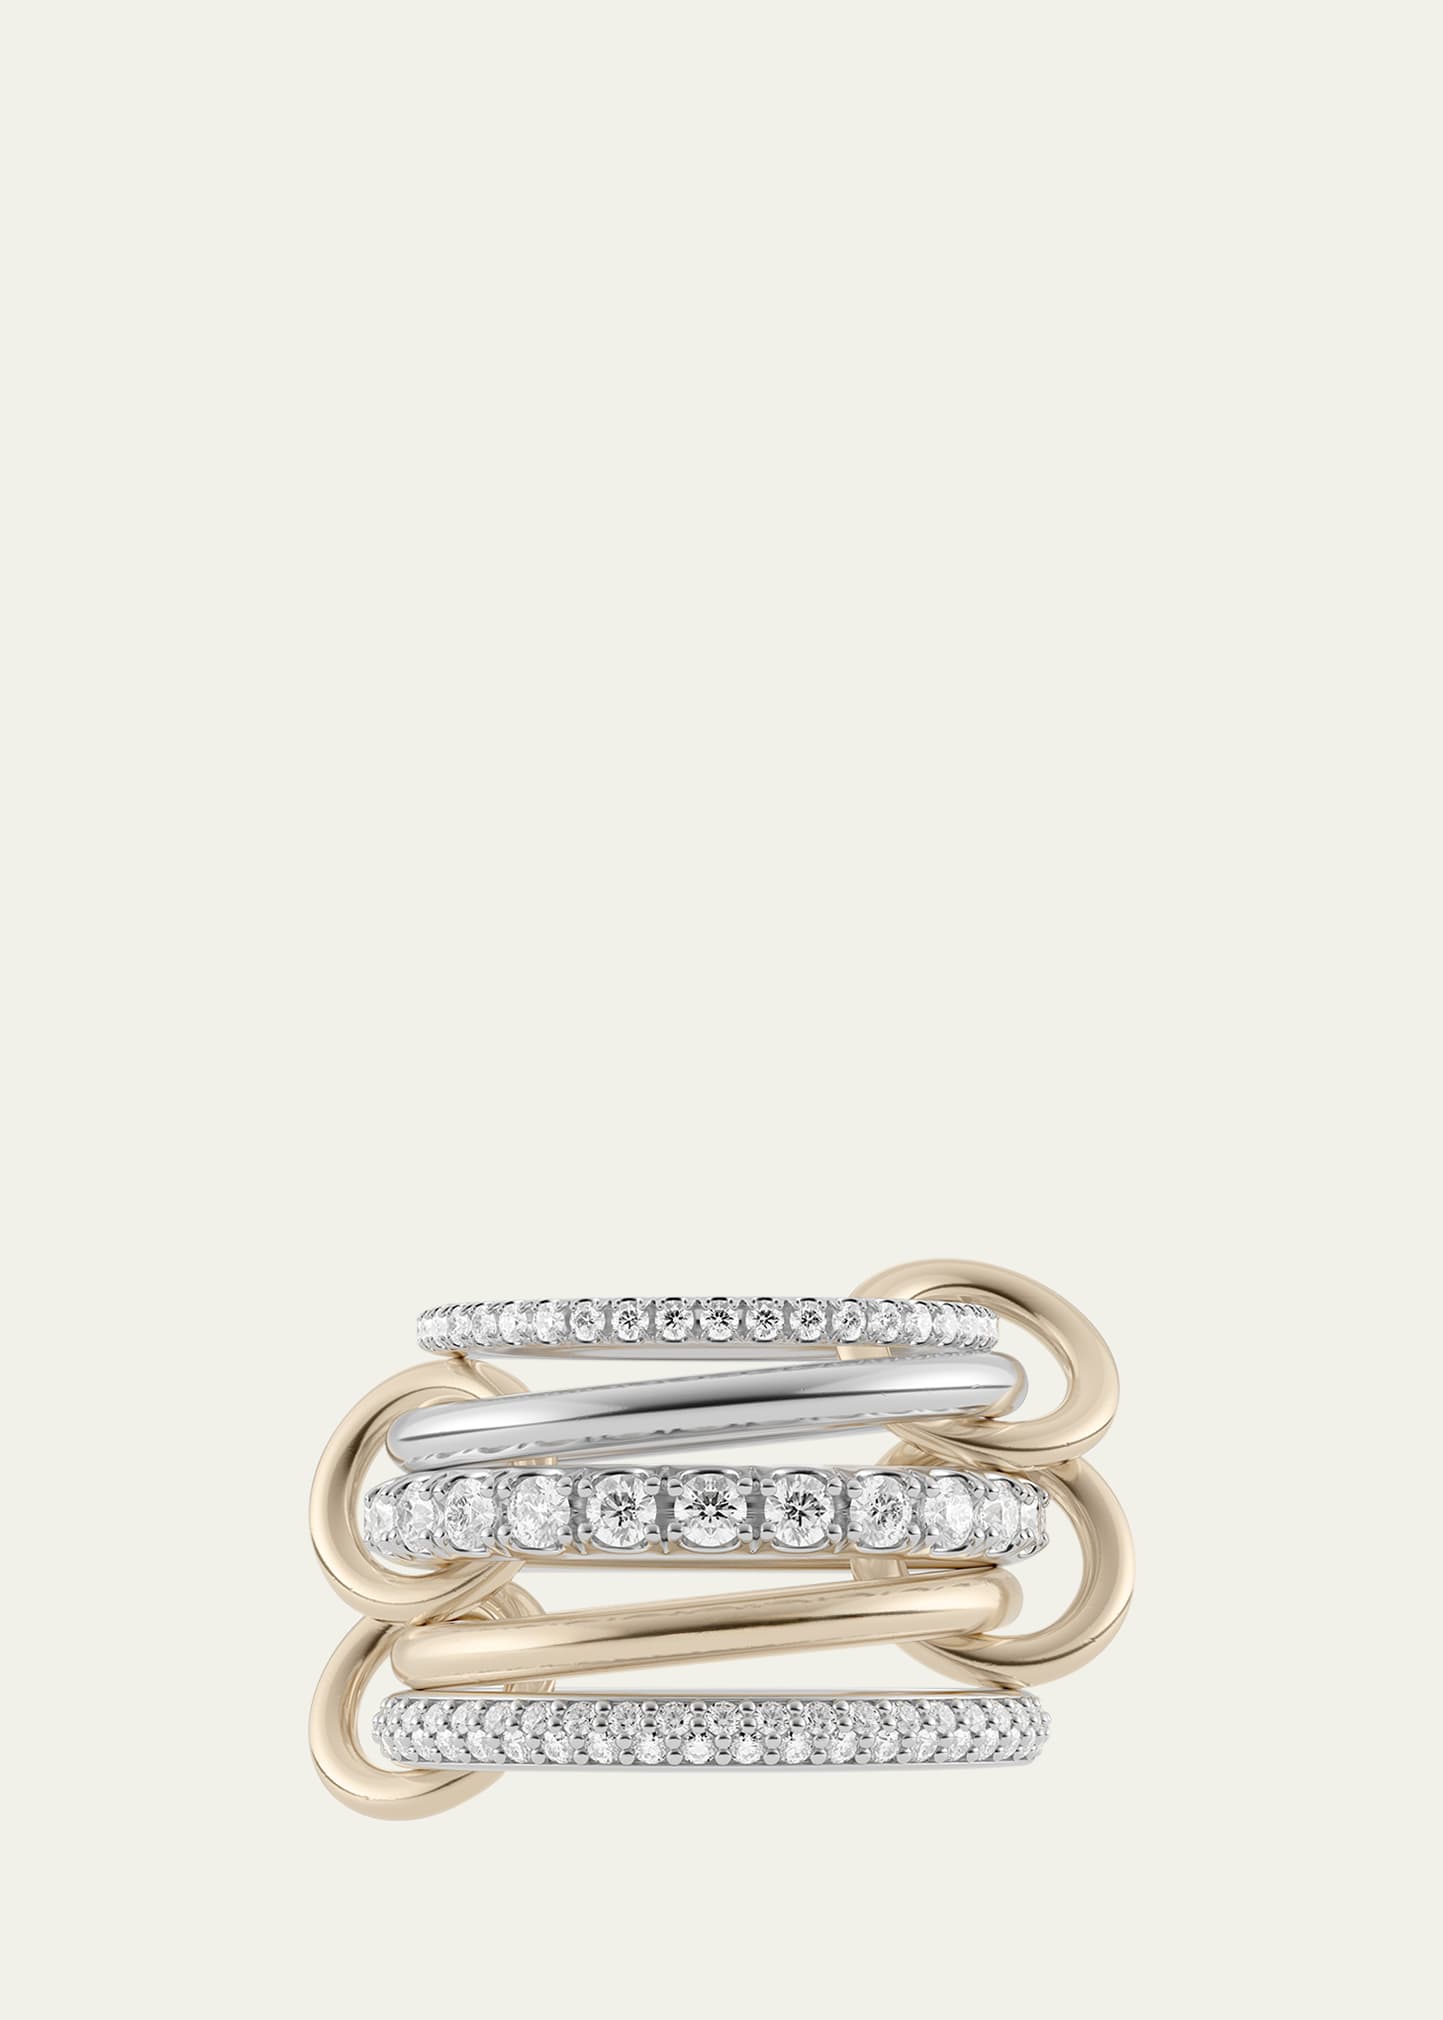 Leyla SG Five Link Ring in 18K Yellow Gold and Sterling Silver with Diamonds